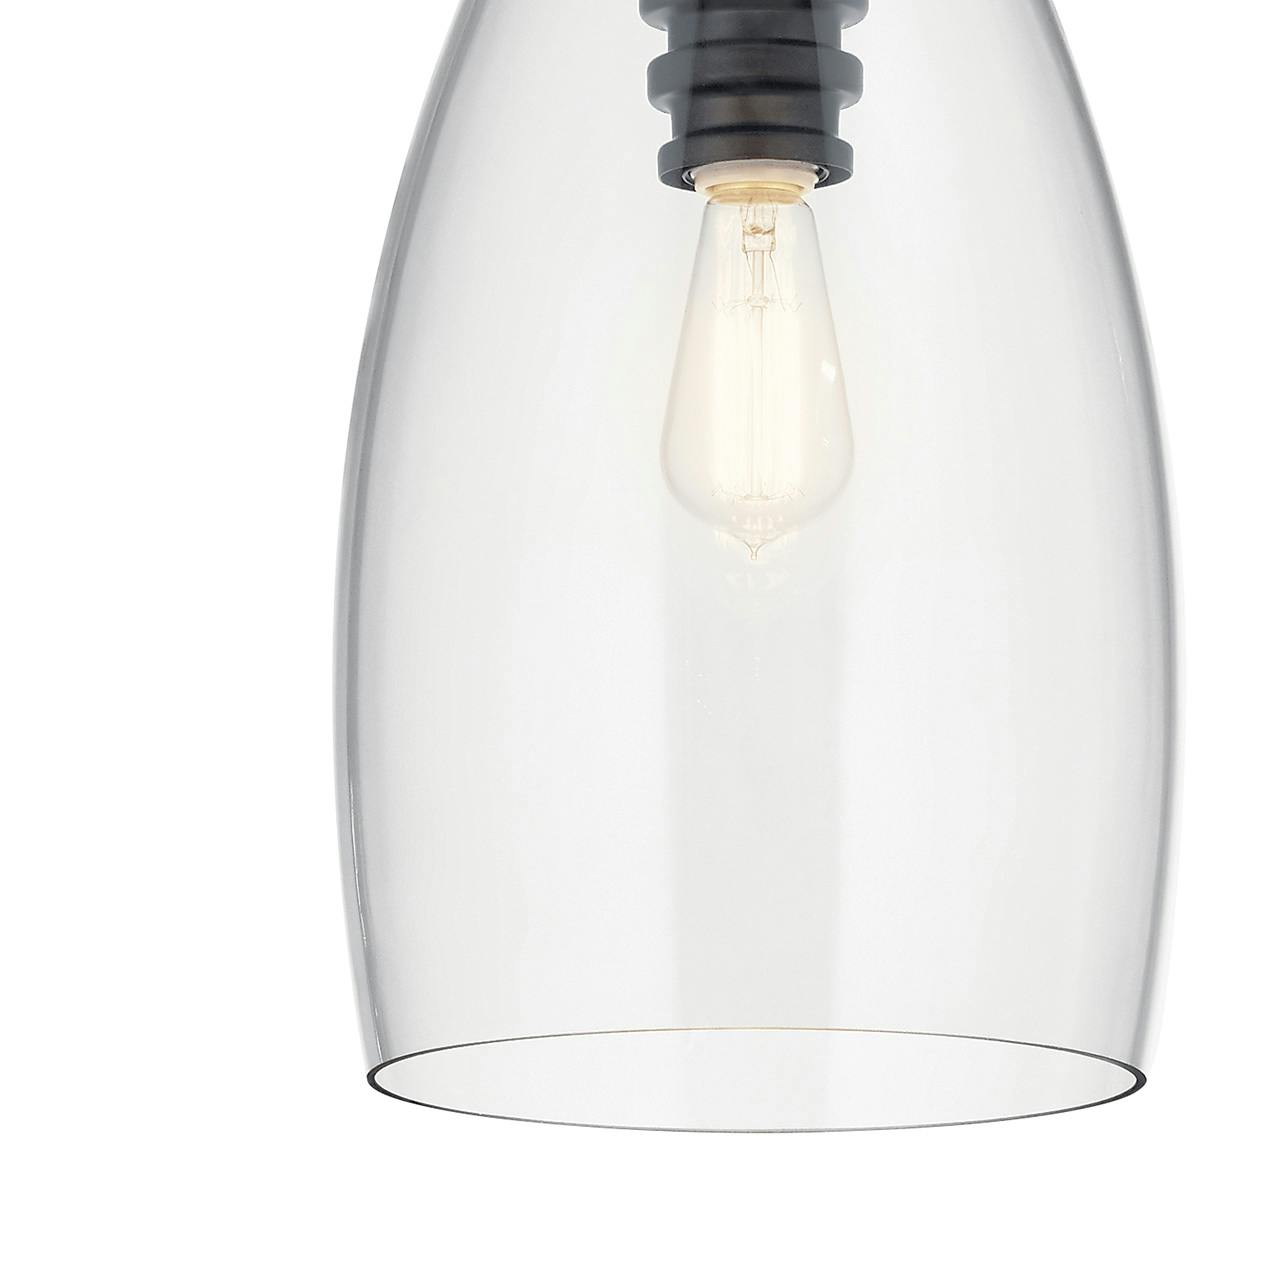 Close up view of the Lakum™ 1 Light Pendant Classic Black on a white background